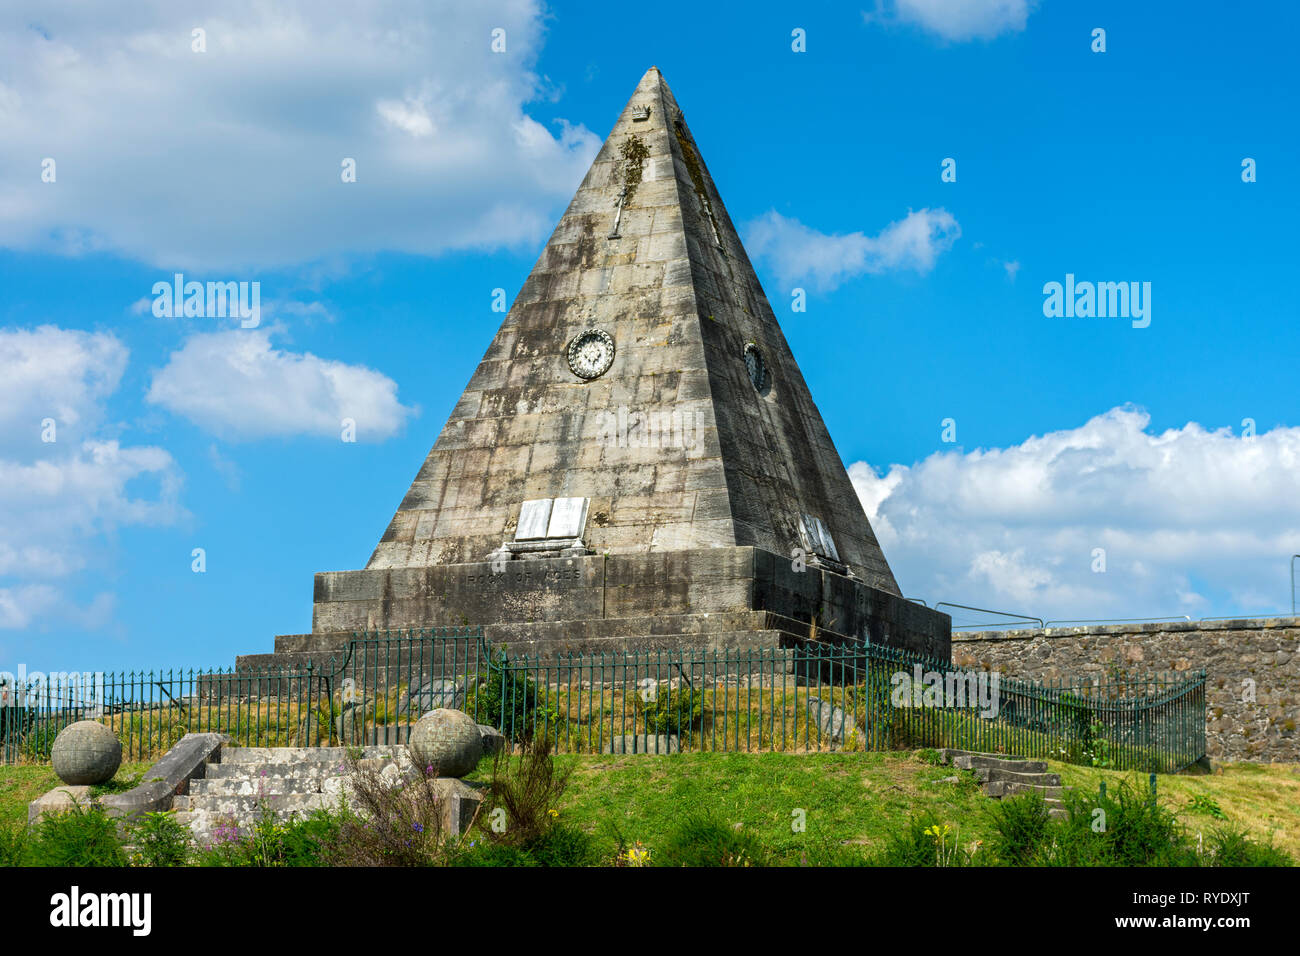 The Star Pyramid in the Old Town Cemetery at the Church of the Holy Rude, Stirling, Stirlingshire, Scotland, UK Stock Photo